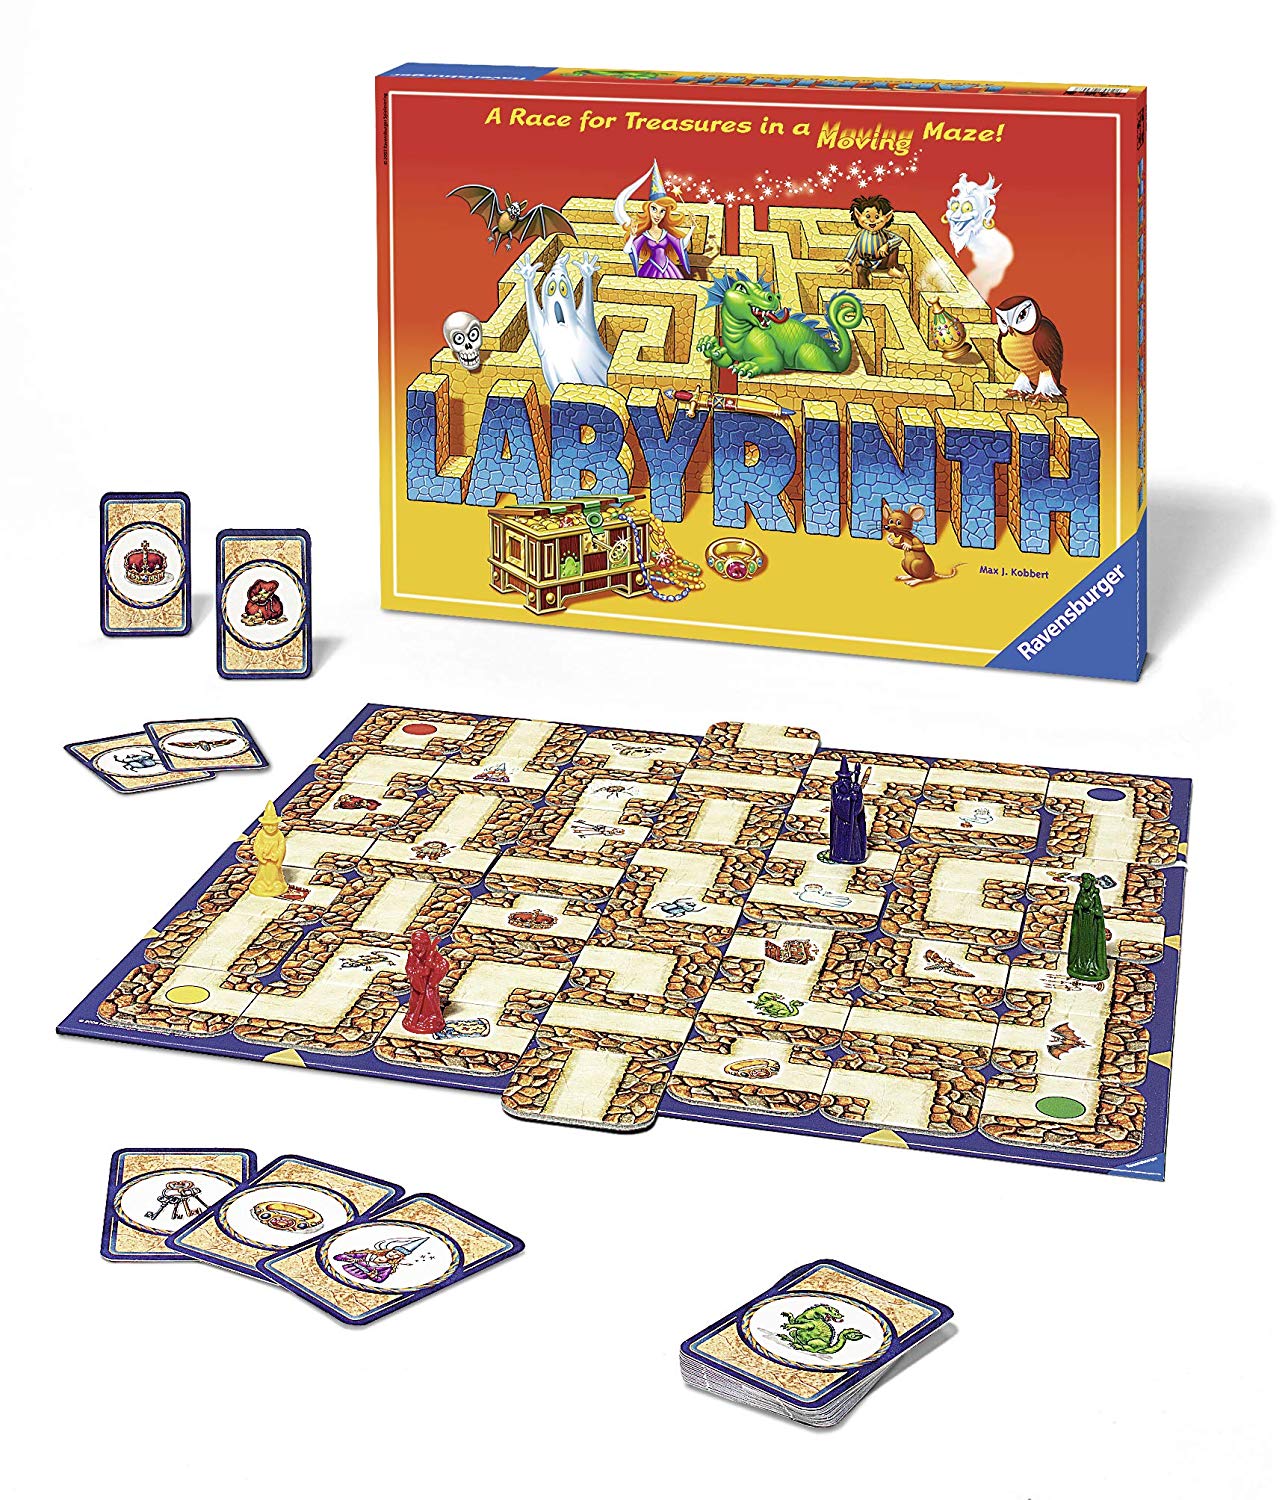 Moving Maze Family Board Game for Kids and Adults Age 7 Ravensburger Labyrinth 